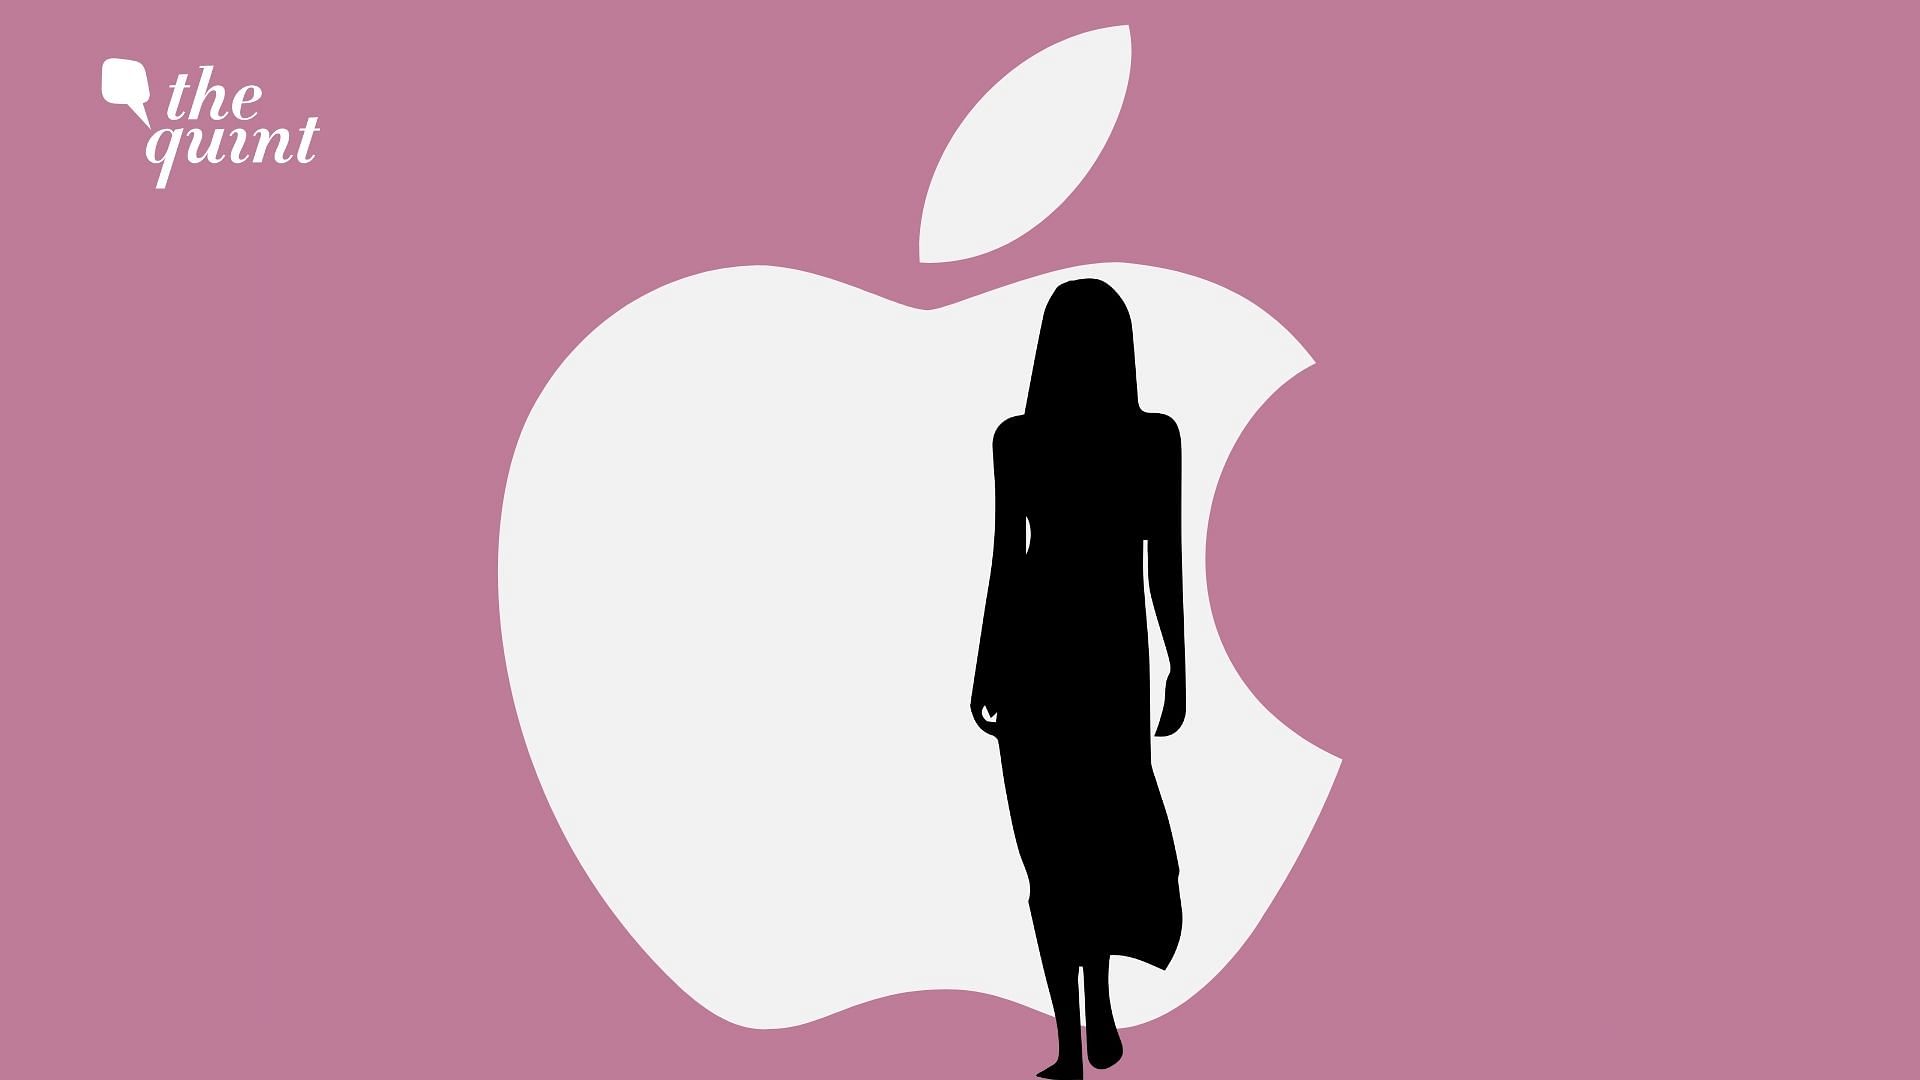 A California State Court recently rejected Apple Inc’s request to “toss out” a lawsuit by a female engineer from India who alleged that her two managers treated her to be subservient and discriminated against her.